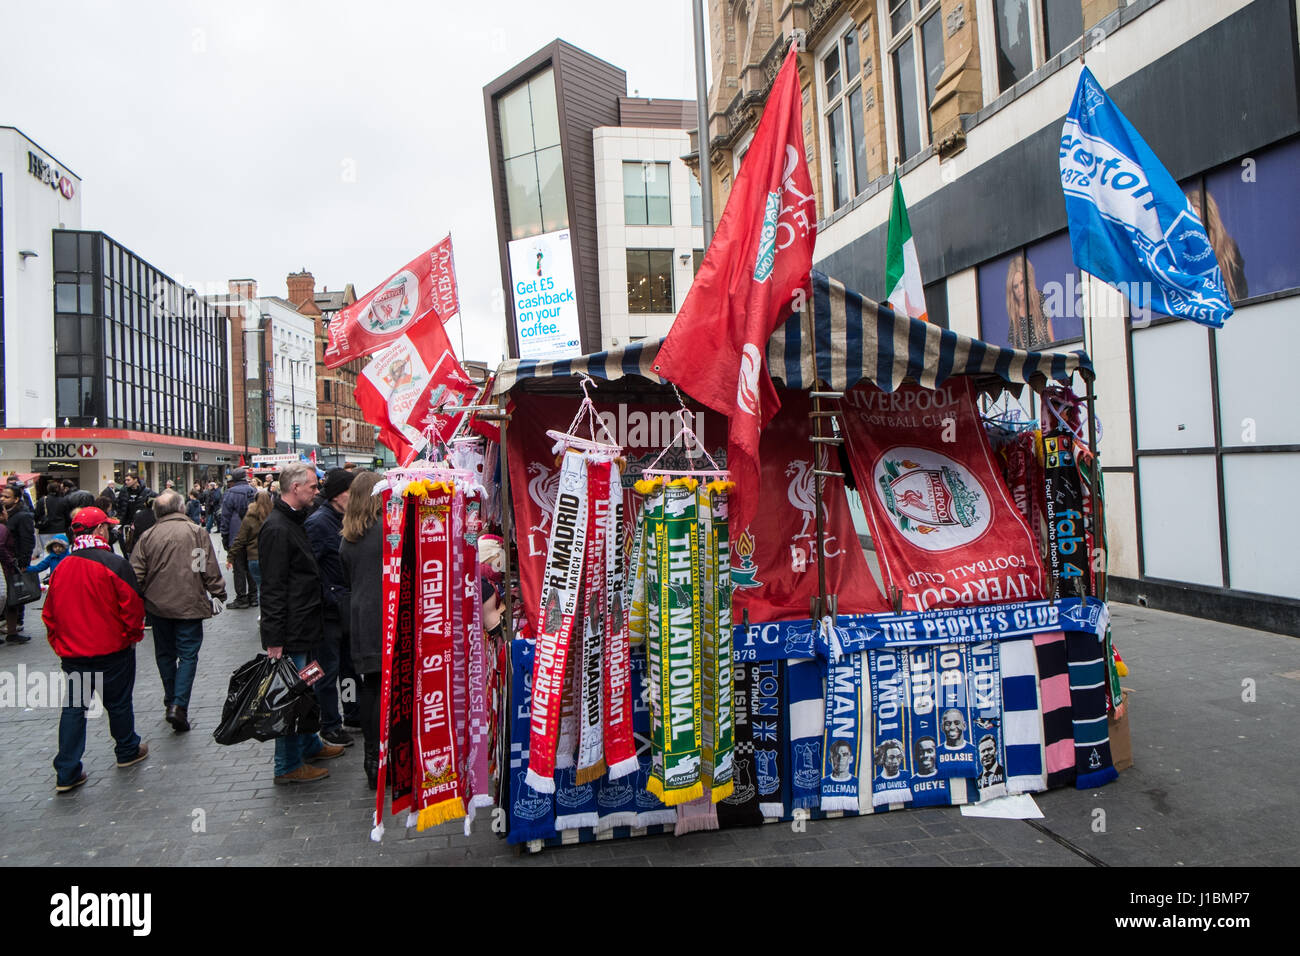 Everton, Liverpool Football club,,,CEF,foulard,echarpes,wc séparés,magasin,ville,Center,LFC Anfield, Liverpool, Merseyside, Angleterre,,Ville,Nord,Angleterre,English,UK,Royaume-Uni. Banque D'Images